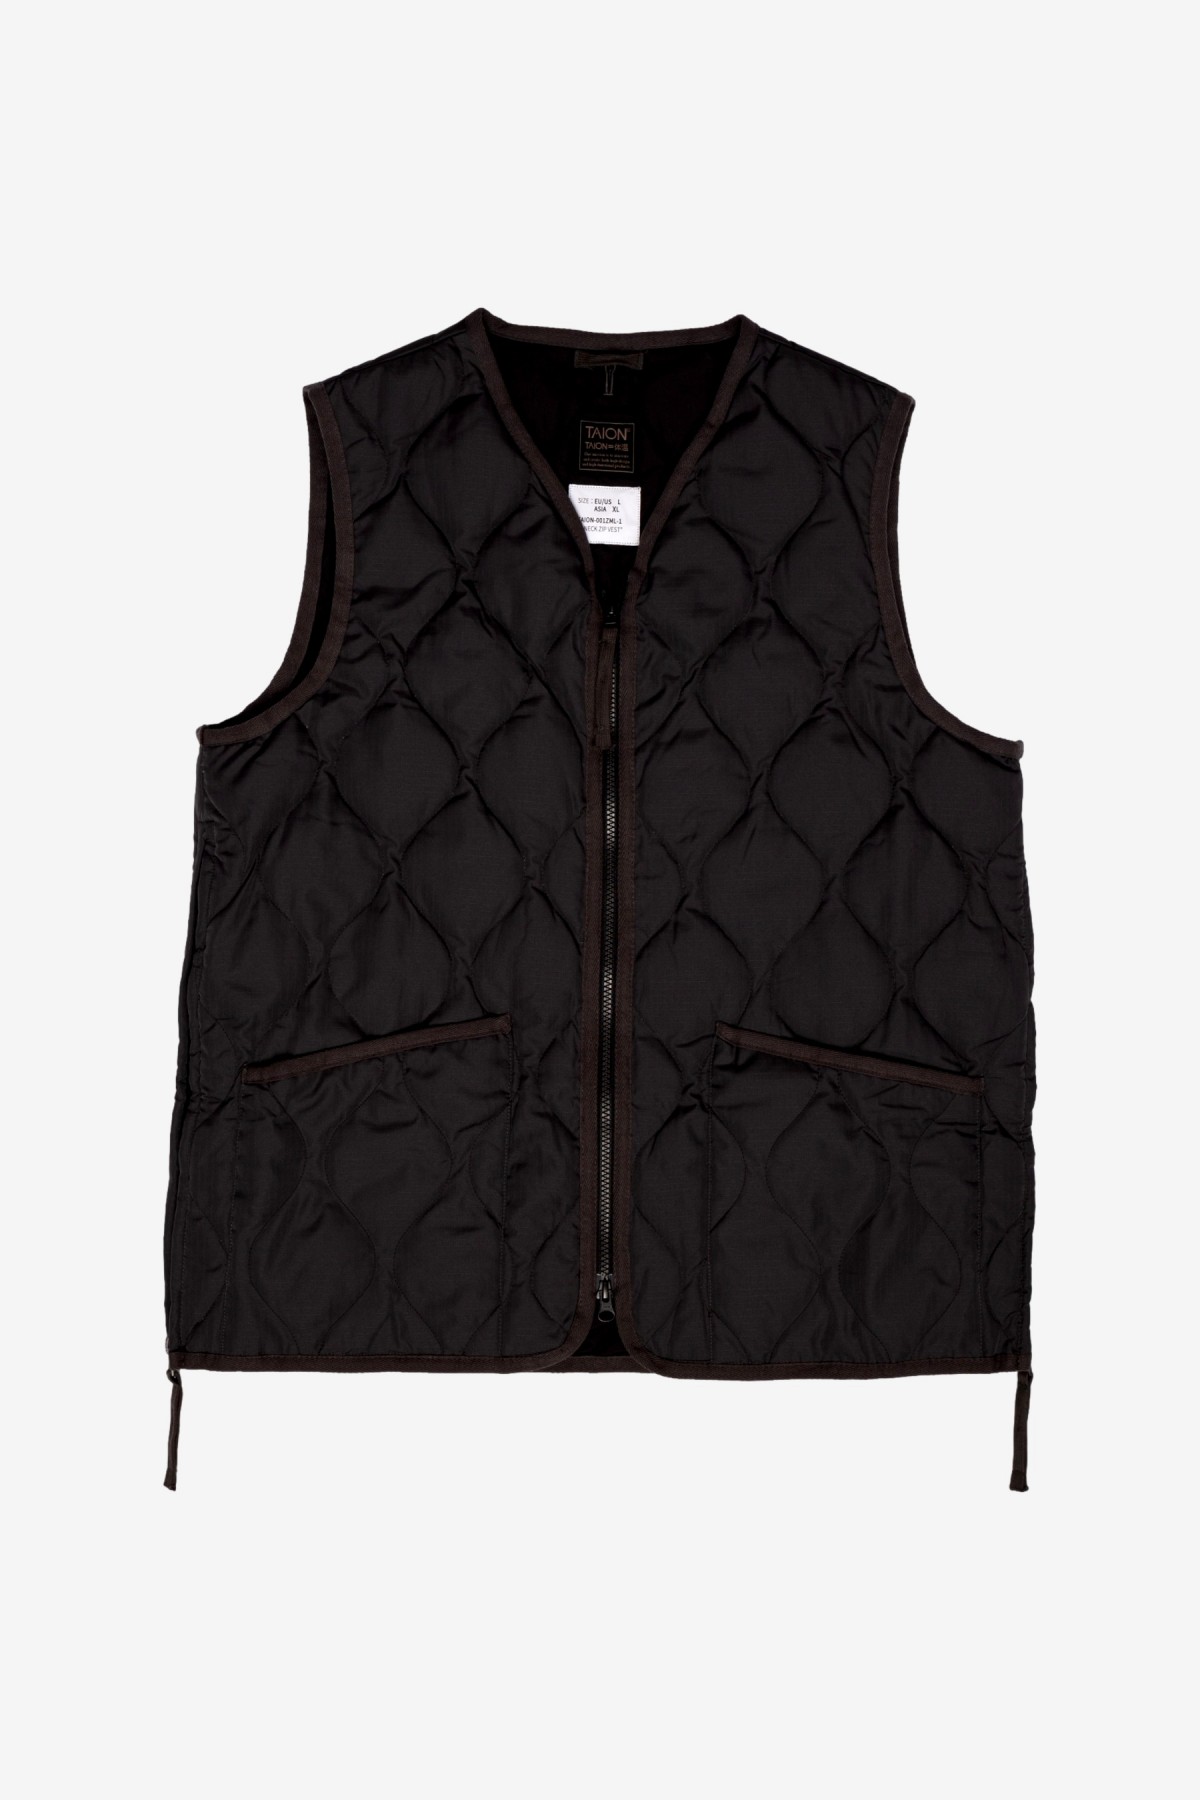 Taion Military Zip V Neck Down Vest in Charcoal